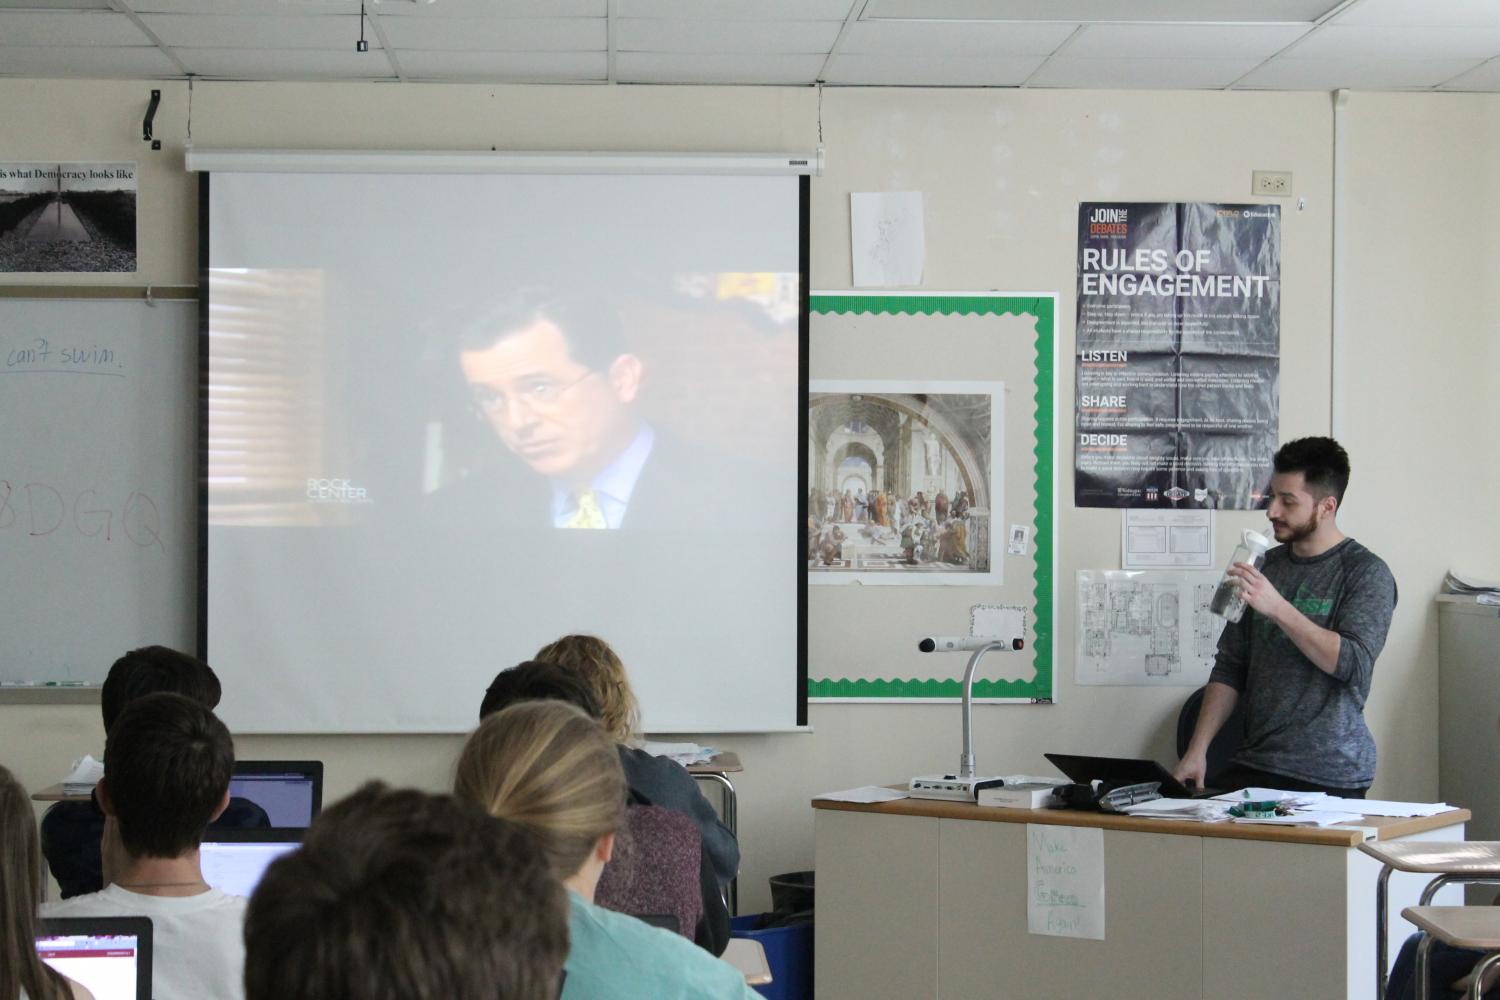 Mr. Greens APUSH class watches a Stephen Colbert clip focusing on campaign finance.